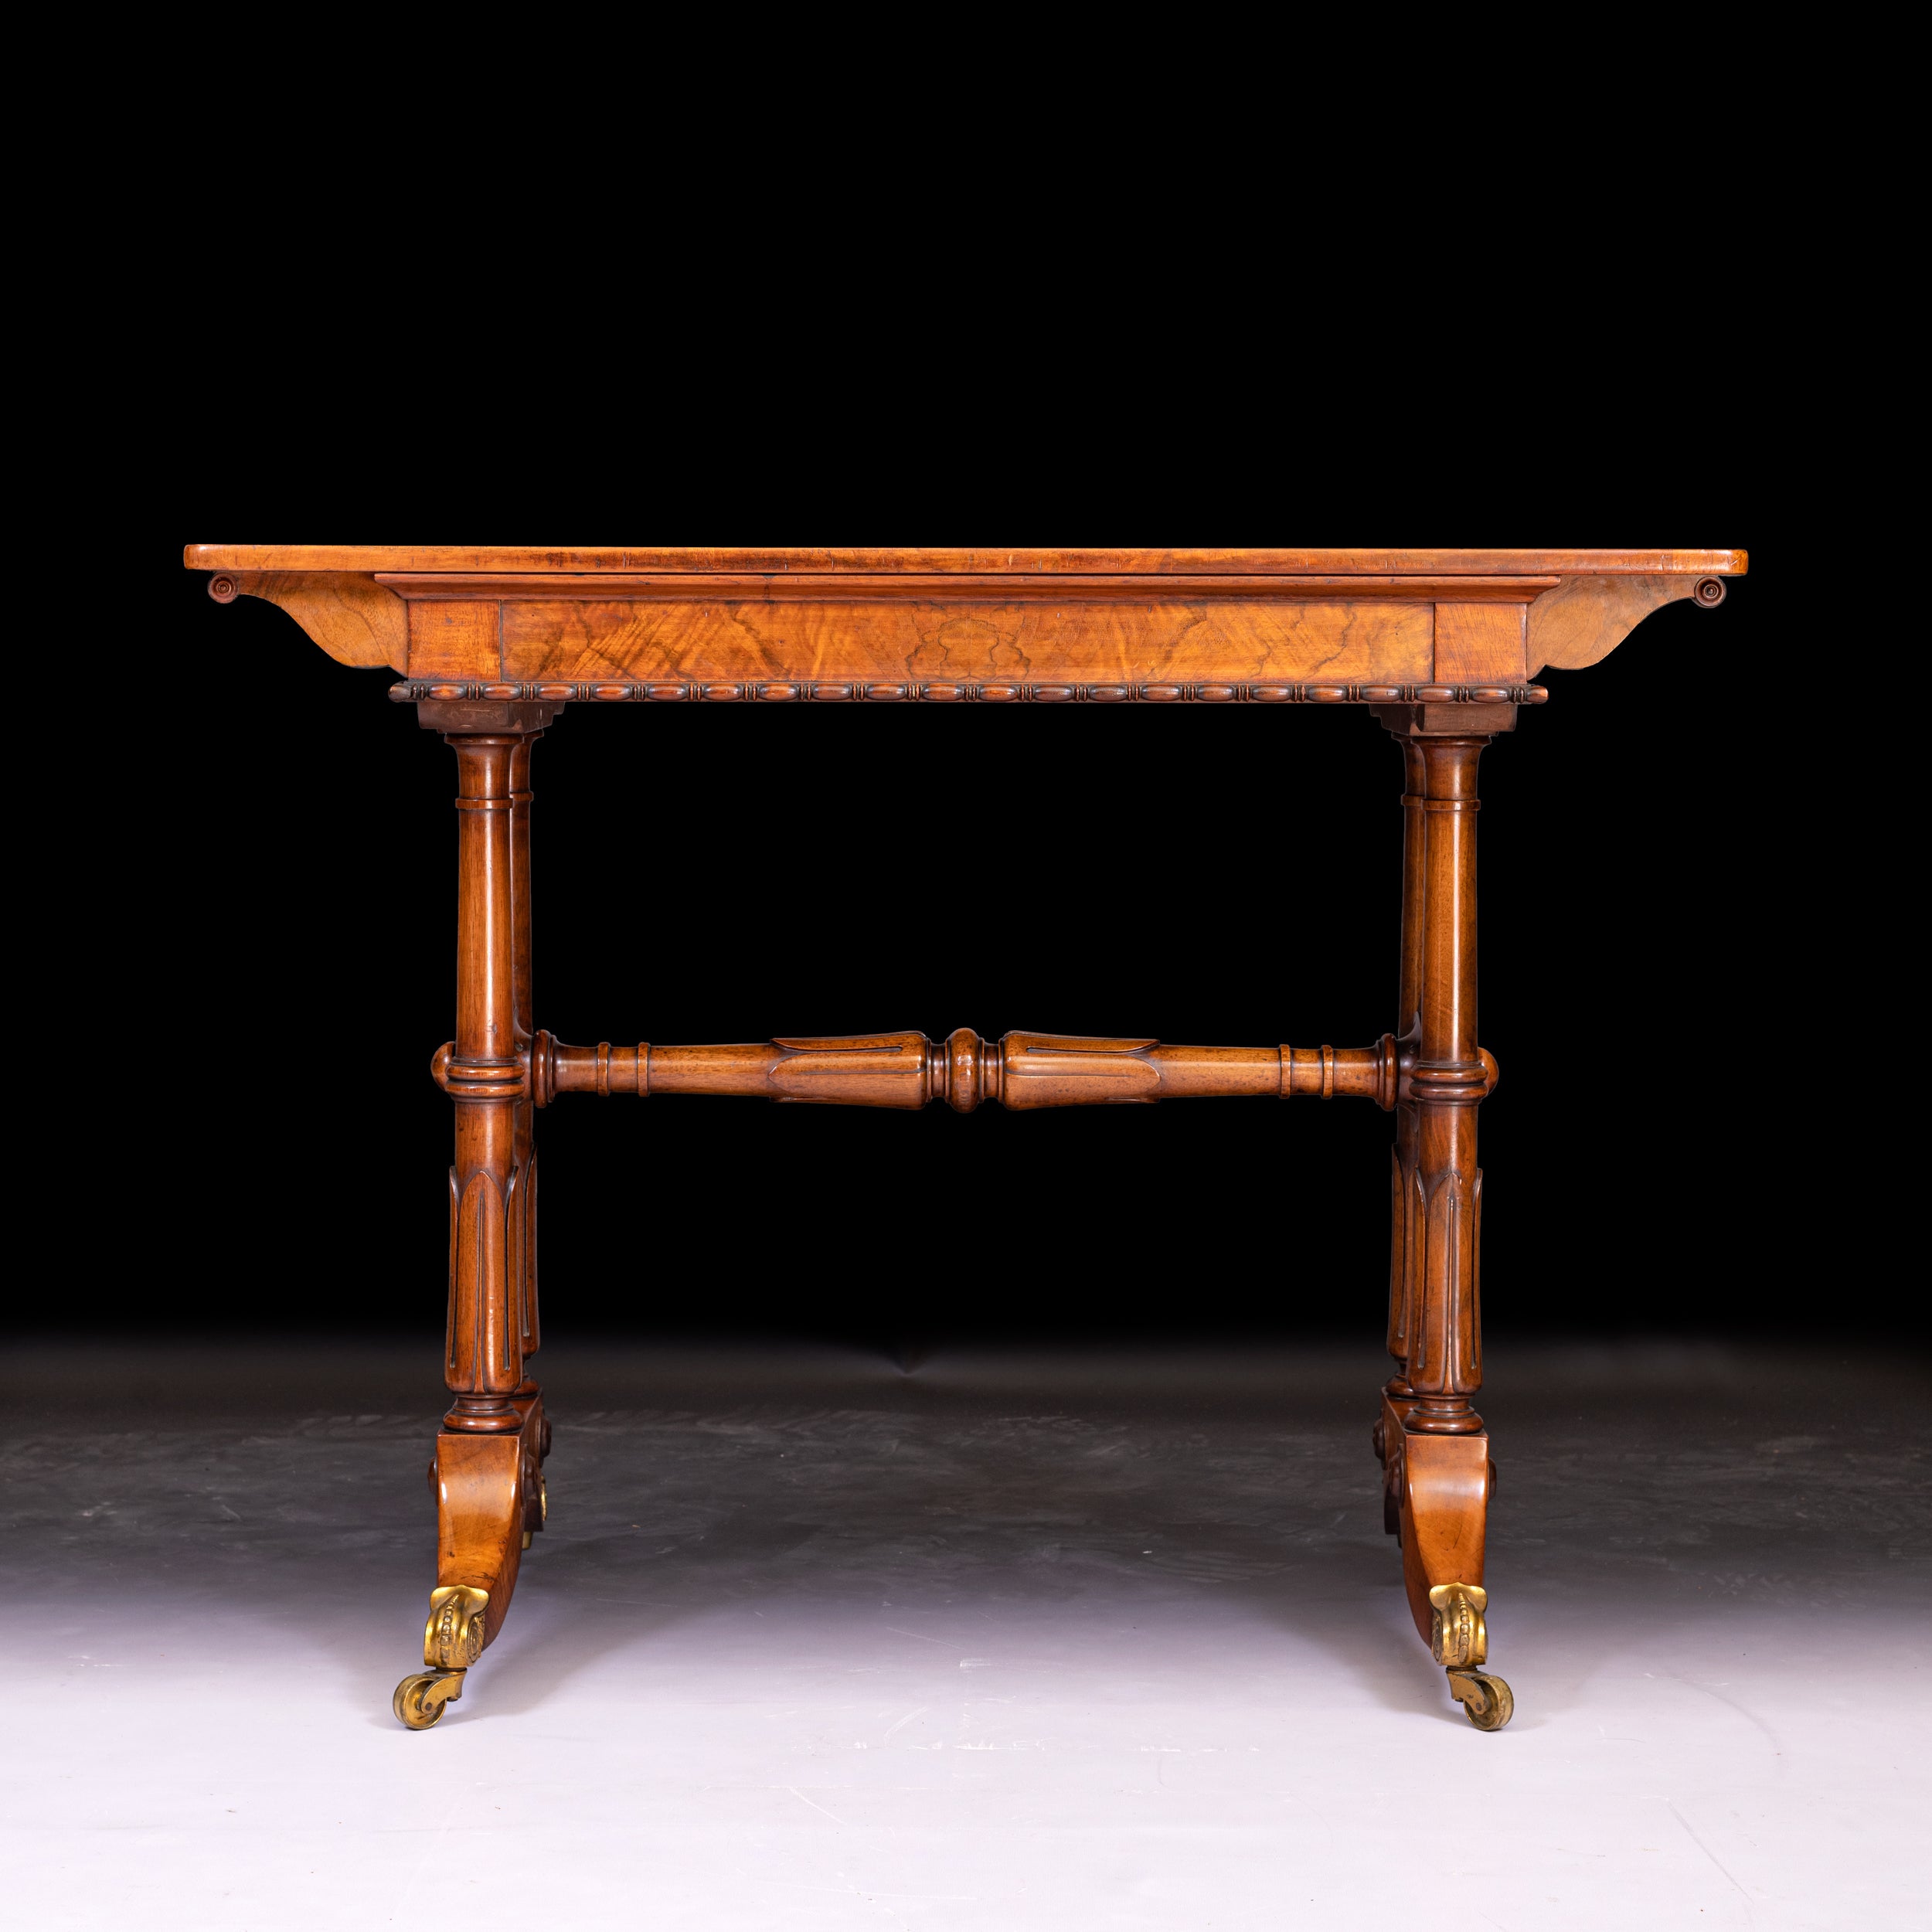 REGENCY WALNUT WRITING TABLE ATTRIBUTED TO HOLLAND & SONS  - REF No. 3013